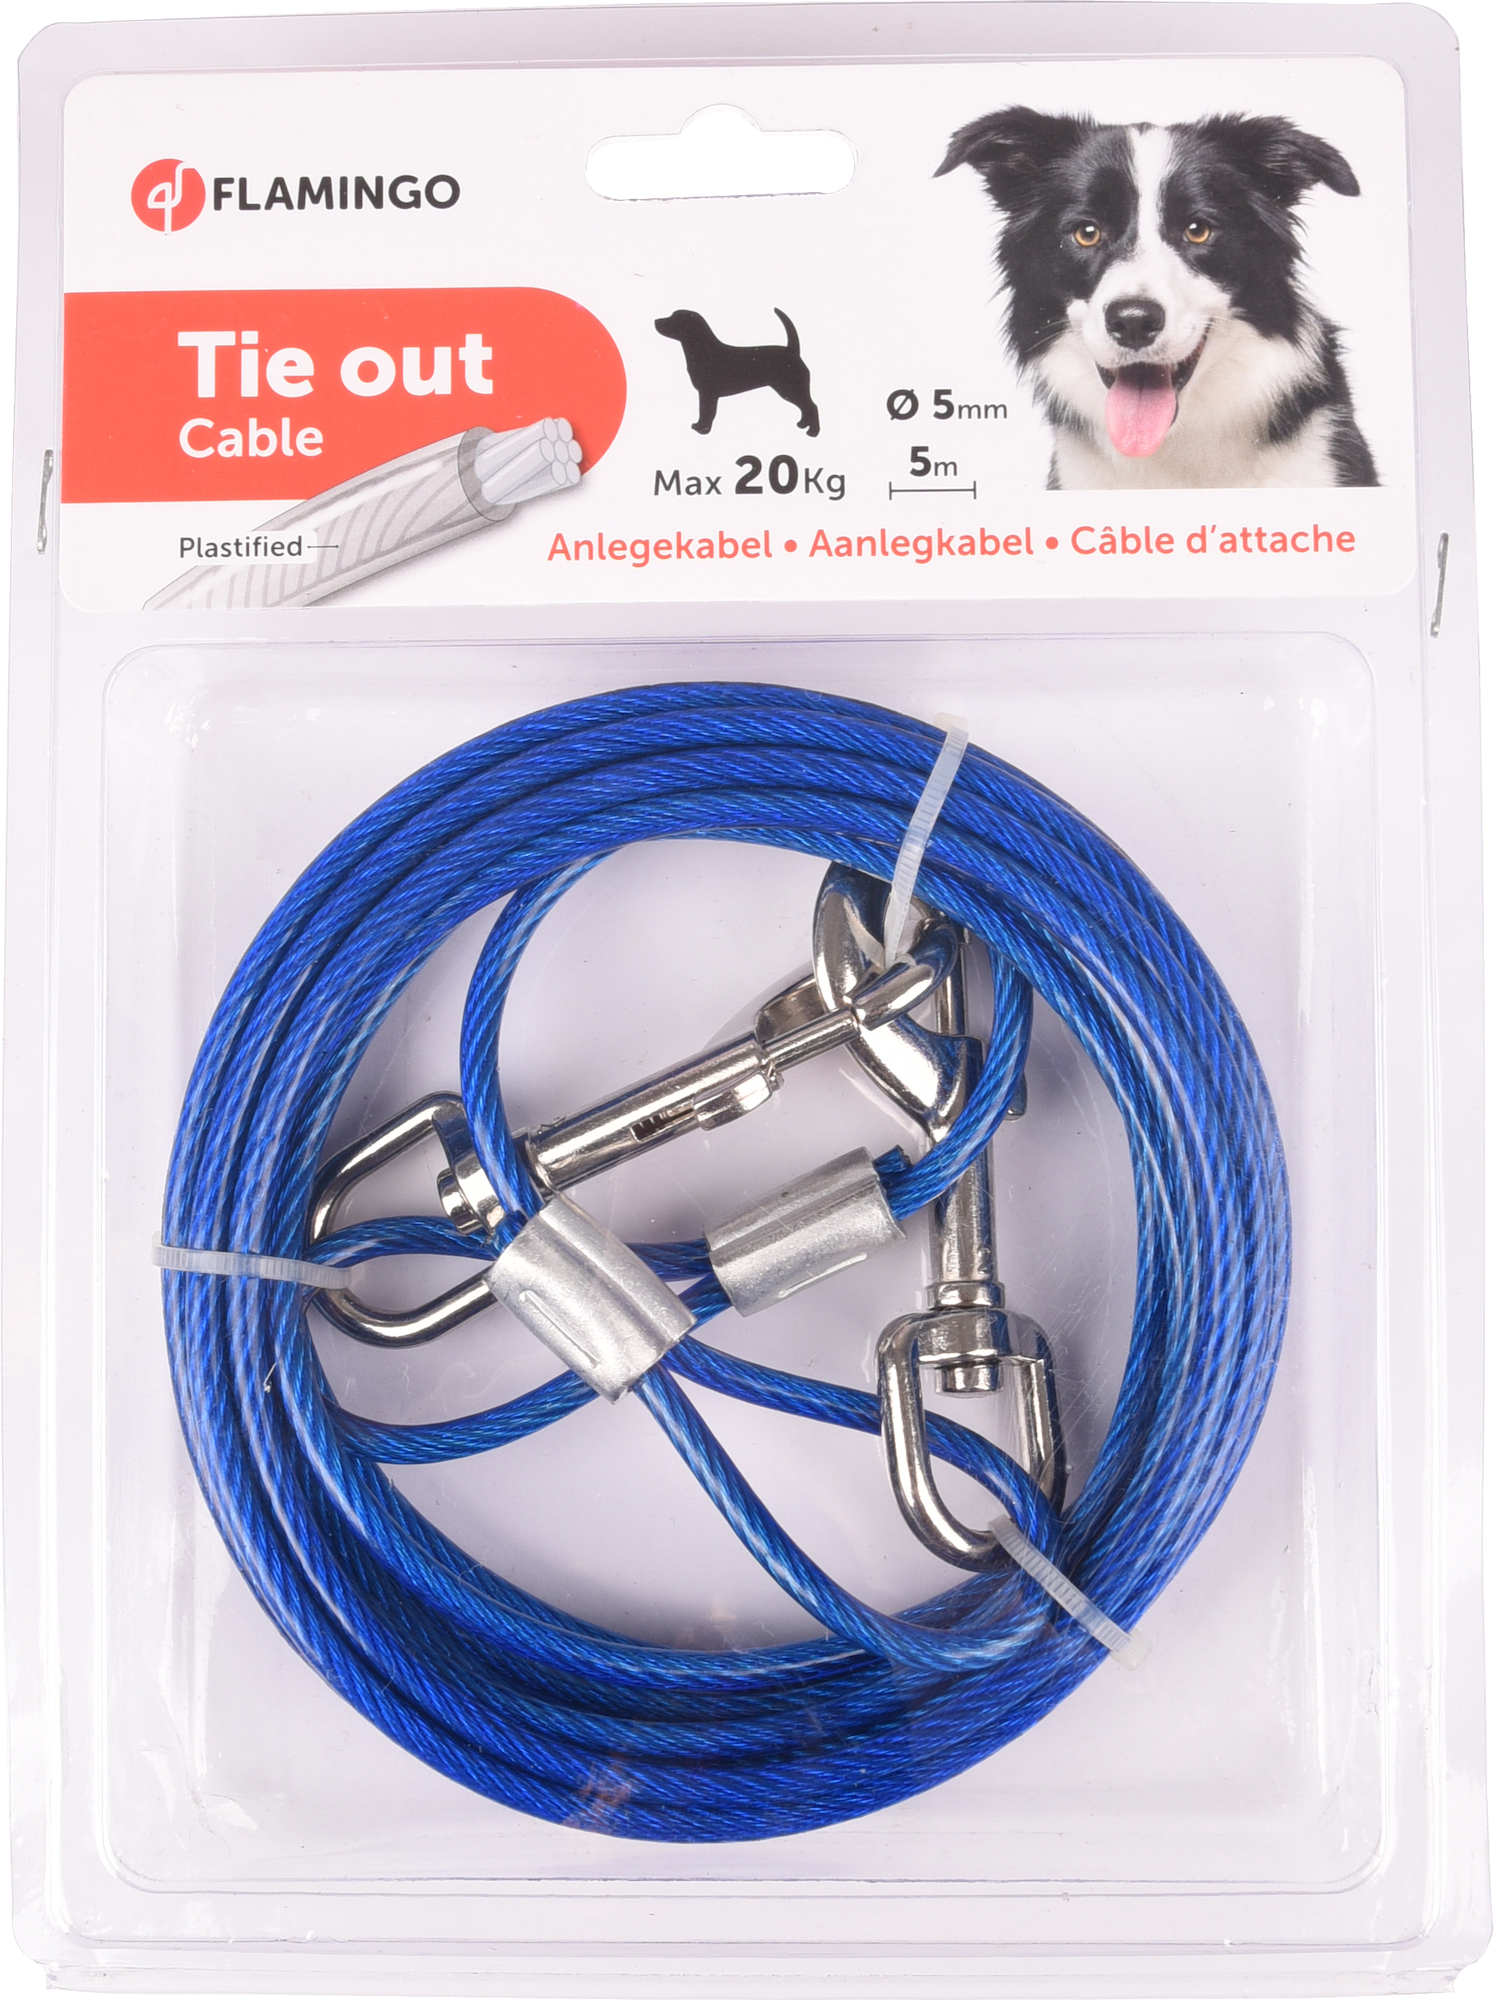 Tie out cable Blue | 506971 | Flamingo Pet Products